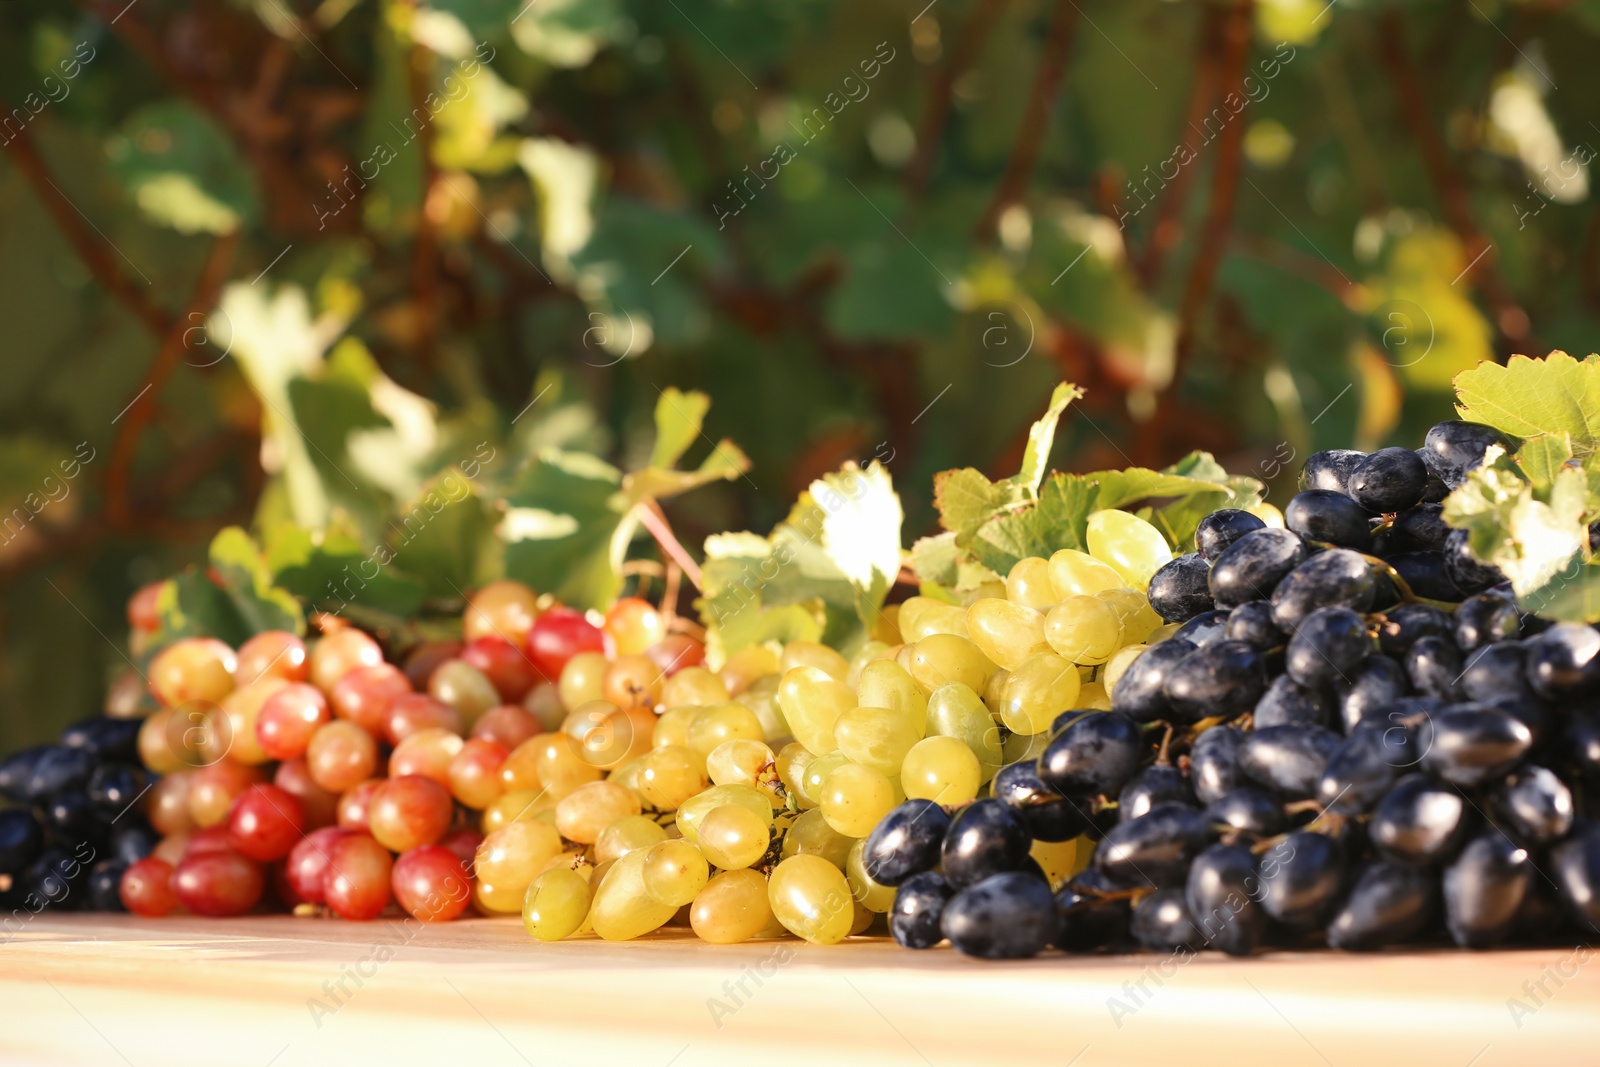 Photo of Fresh ripe juicy grapes on table against blurred background